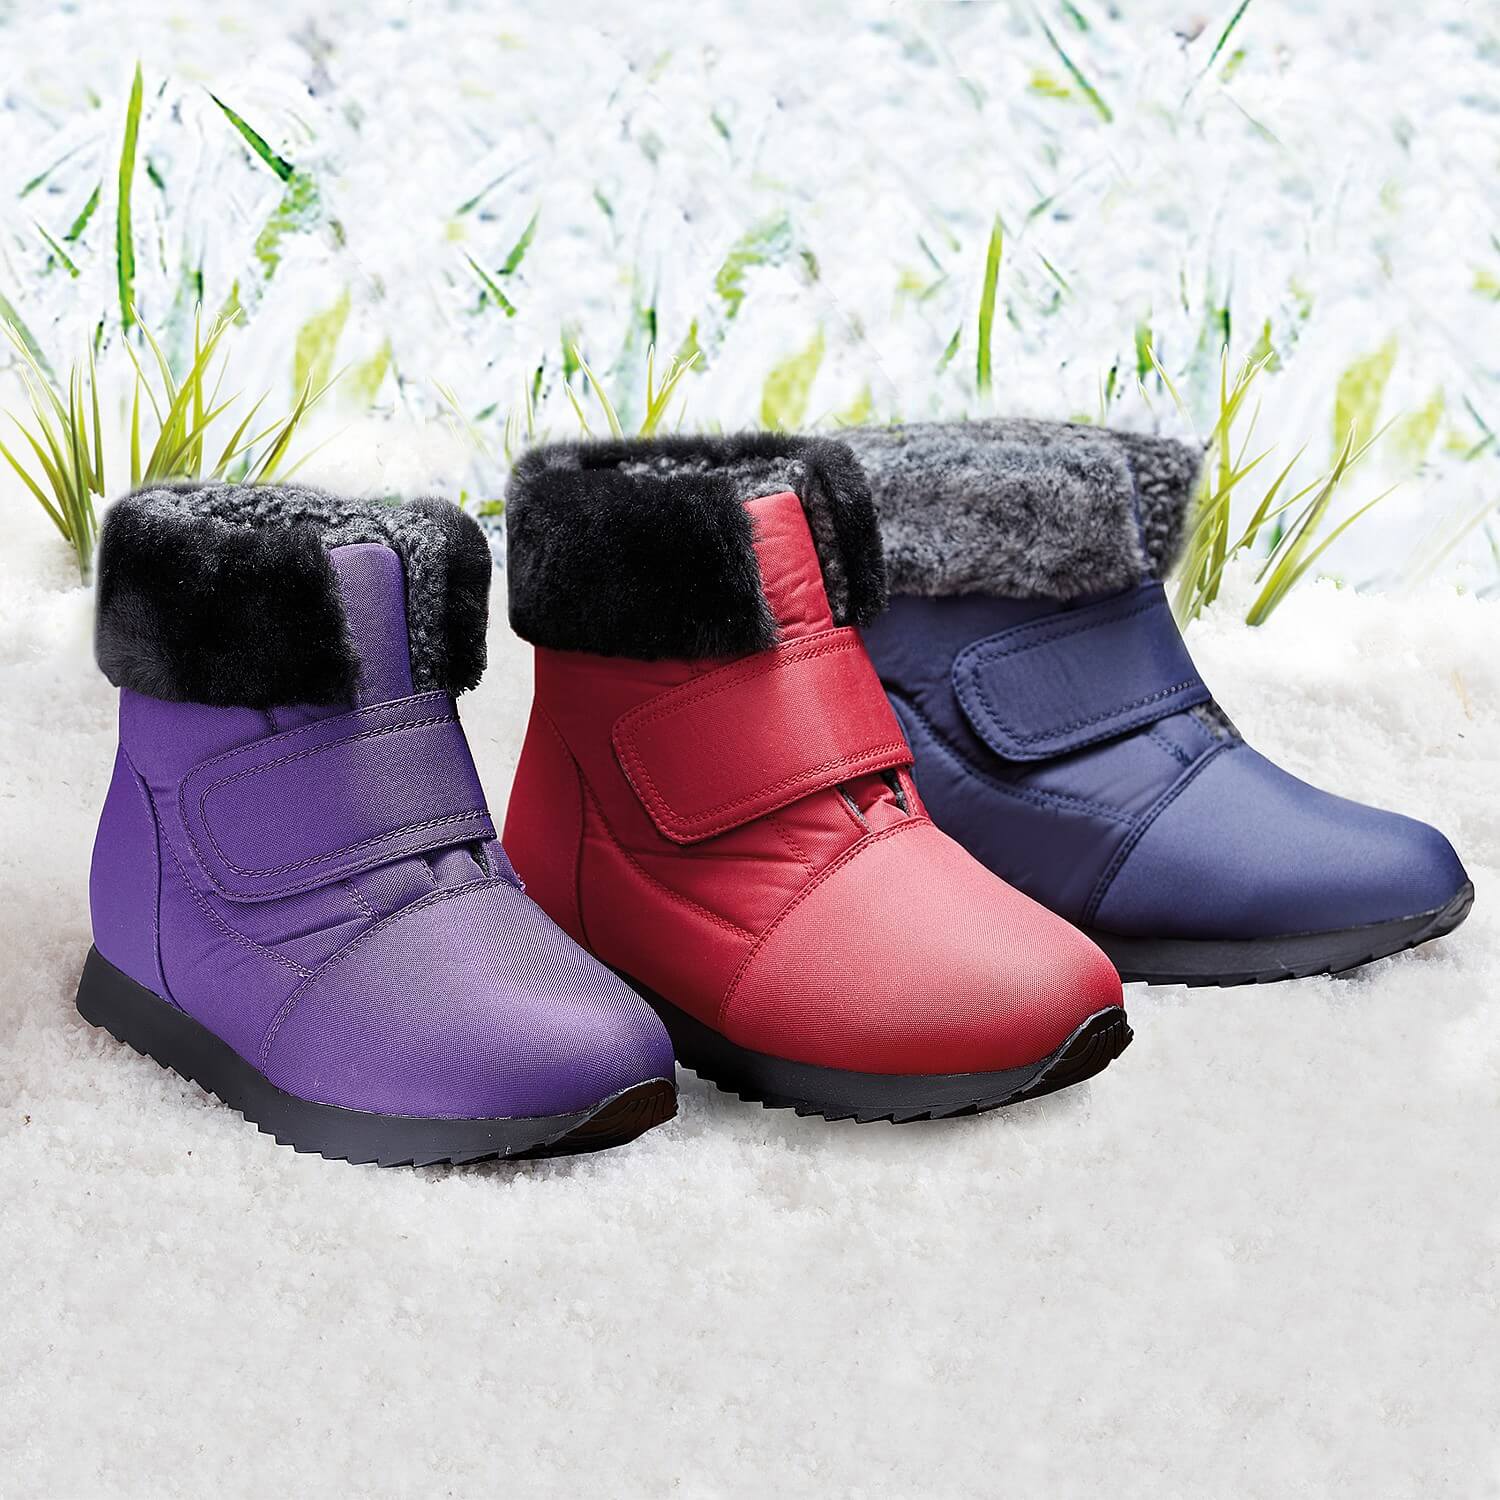 snow and ice boots